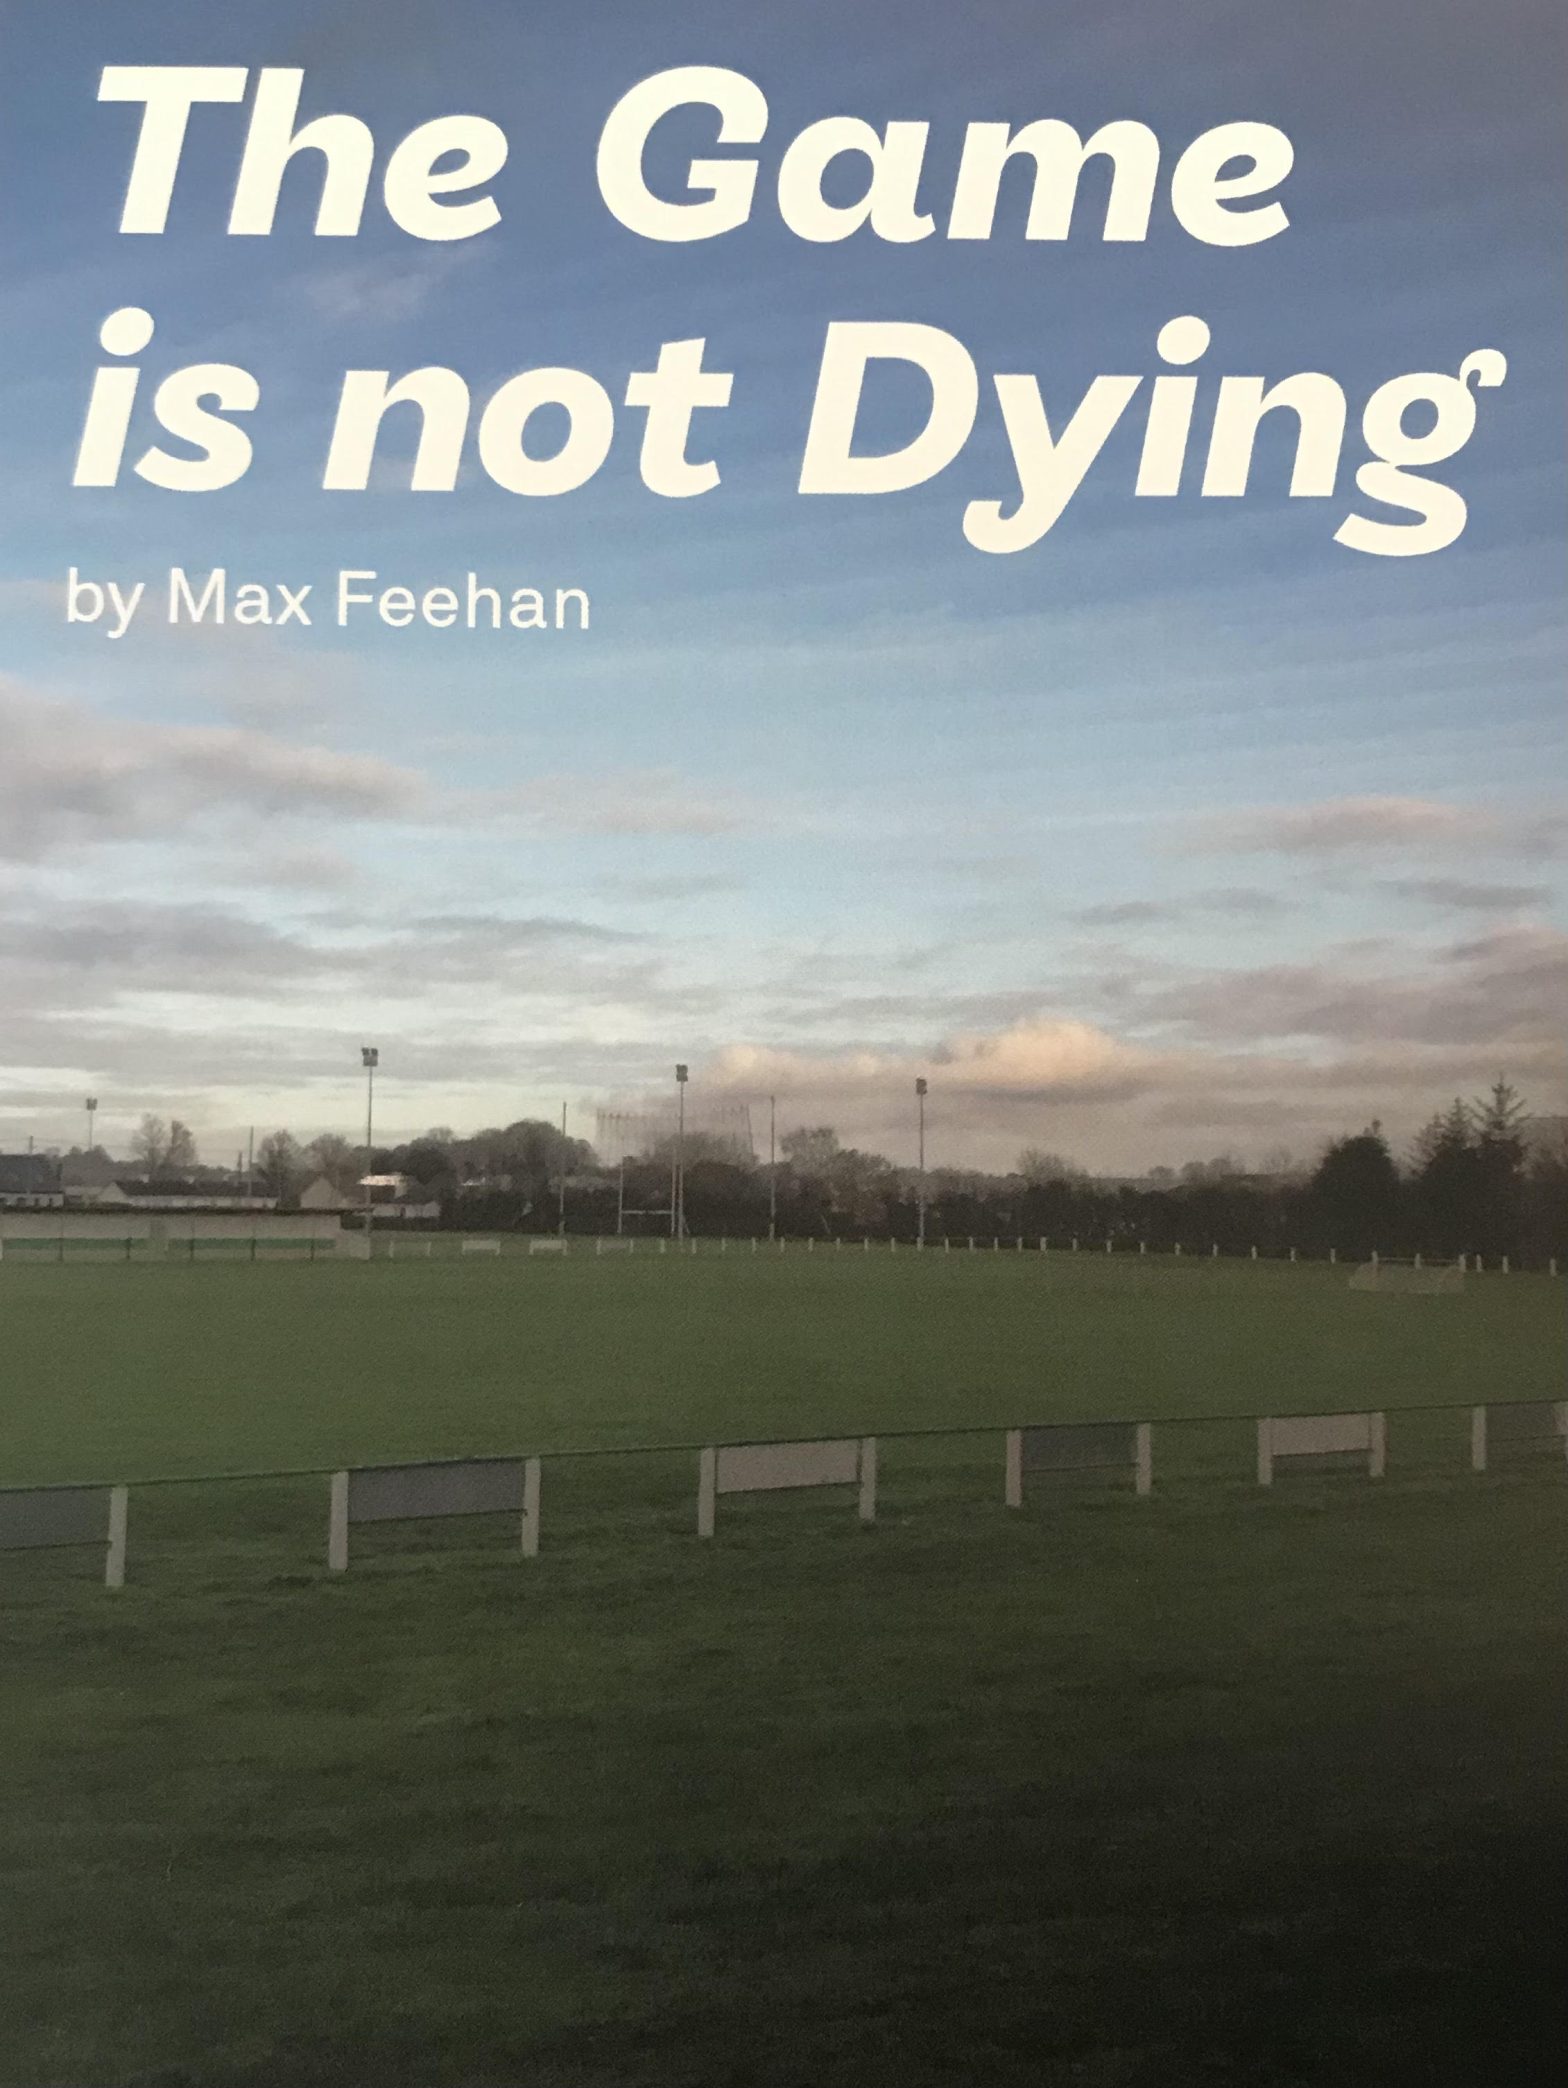 The Game Is Not Dying, Max Feehan